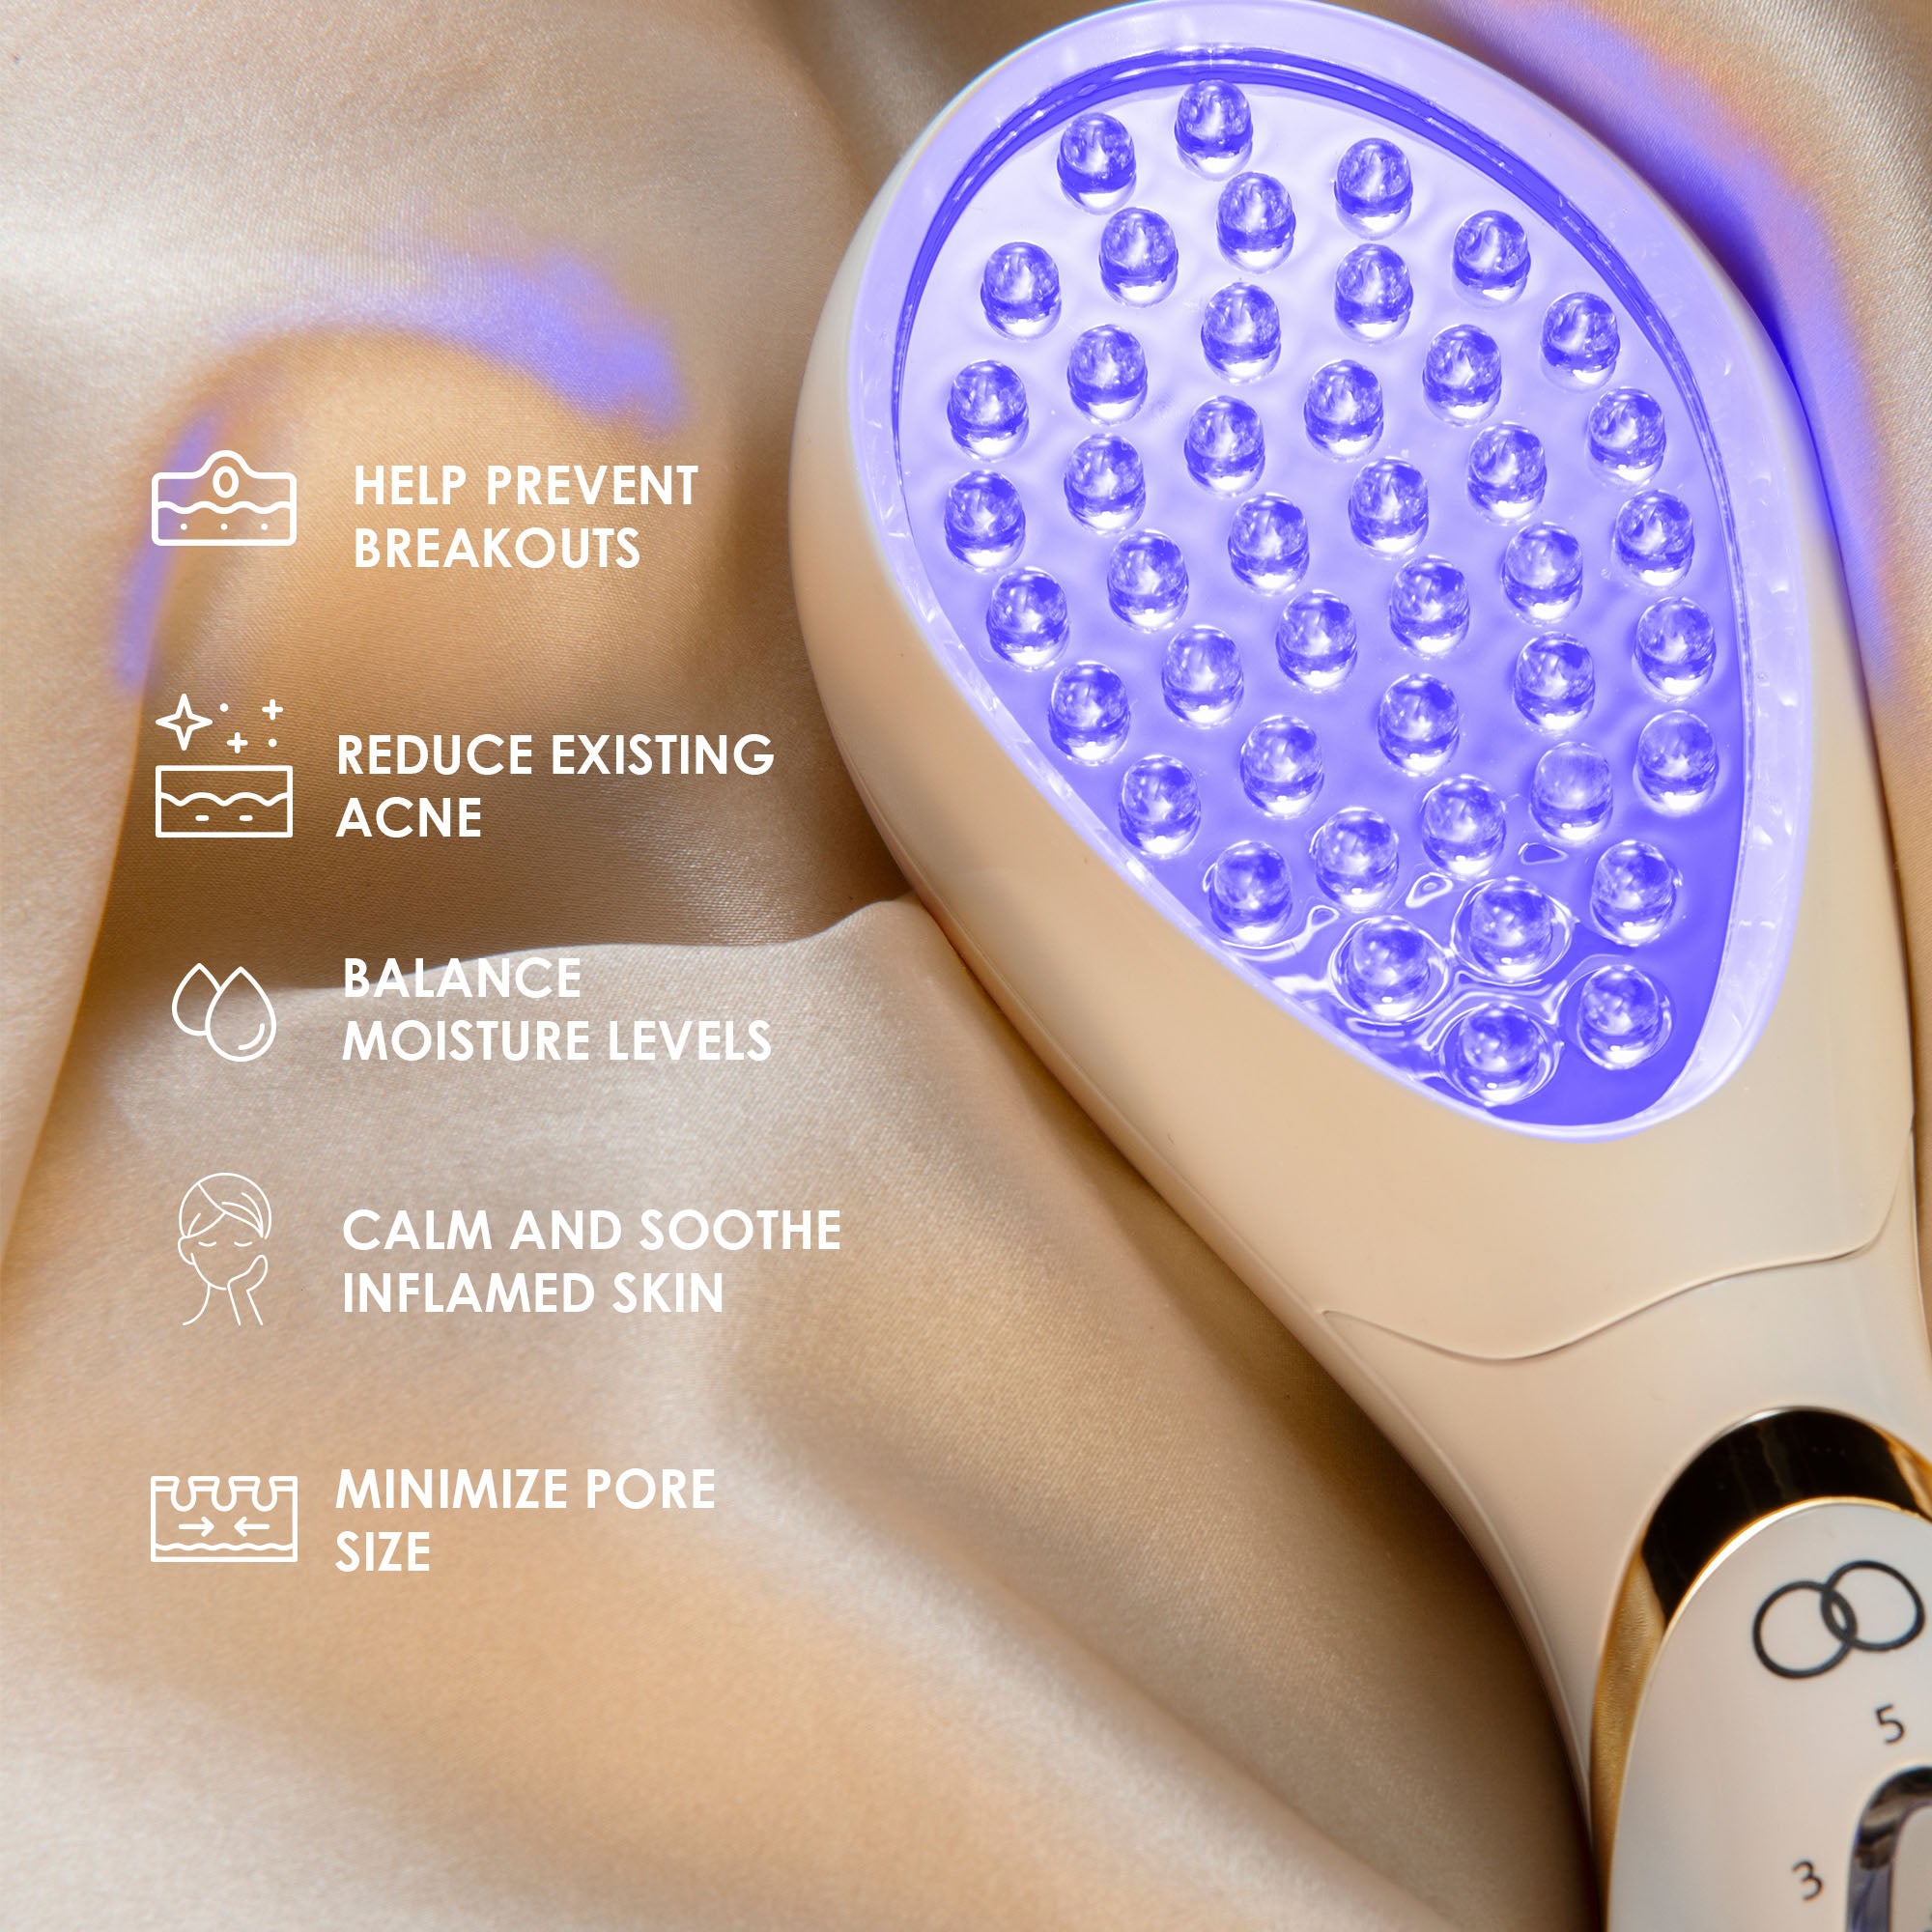 LumaGlow | Blue LED Light Therapy